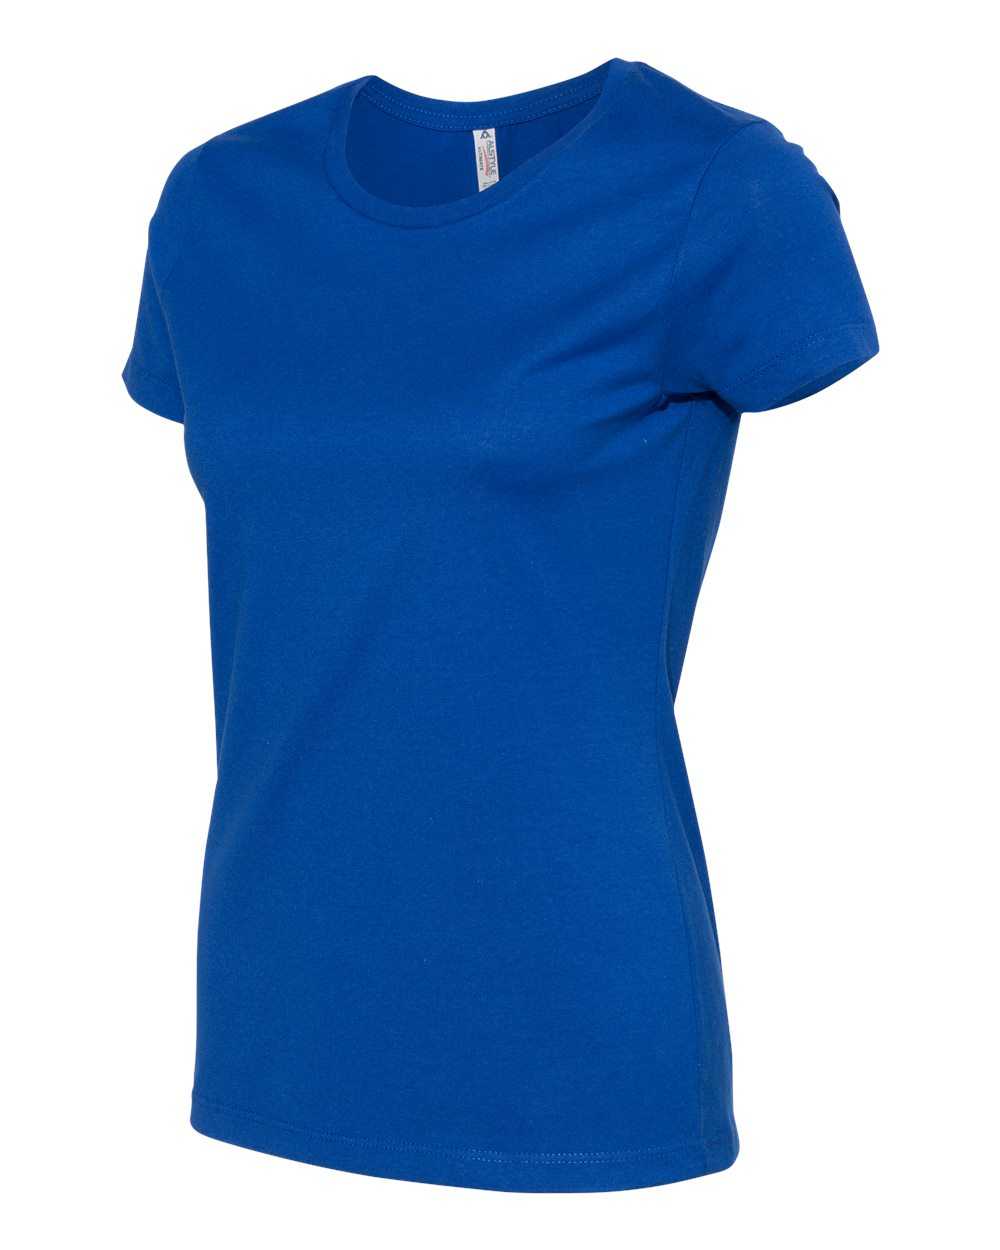 Alstyle 2562 Ultimate Missy Tee - Royal - HIT a Double